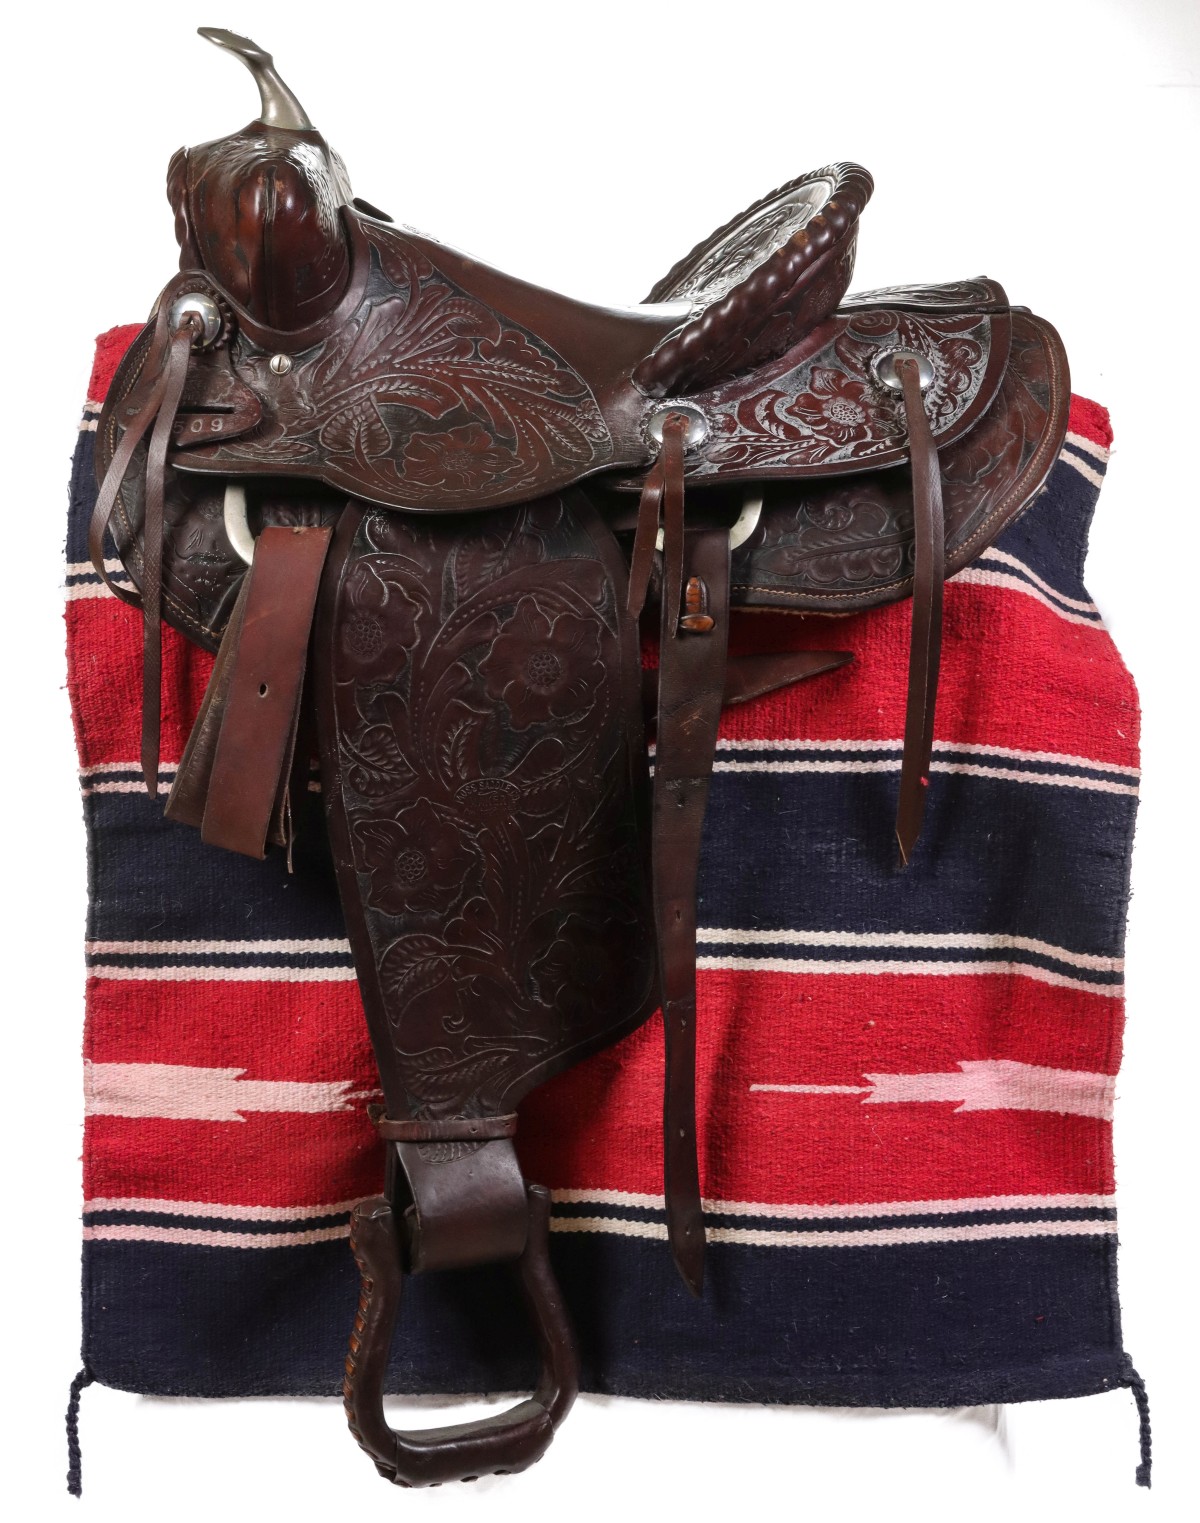 AN ELABORATE TOOLED LEATHER SADDLE STAMPED MOSS CHANUTE